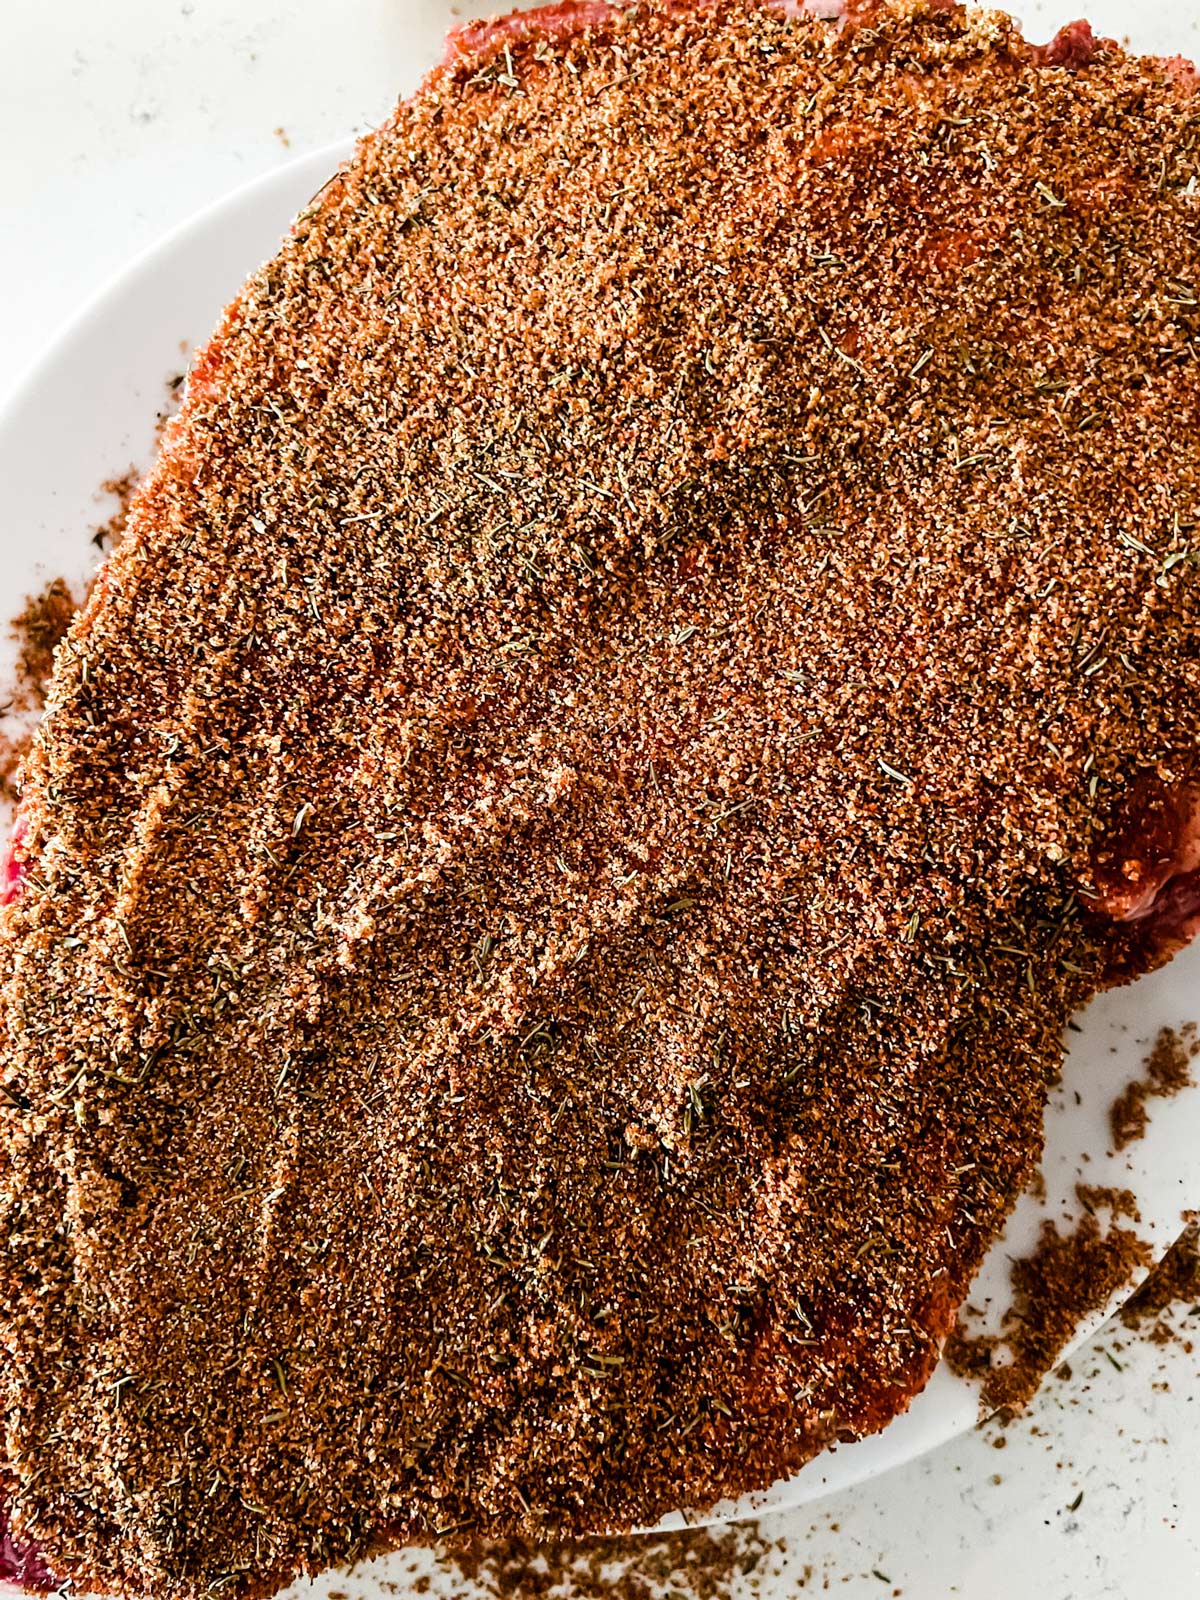 A raw brisket covered in a dry rub.